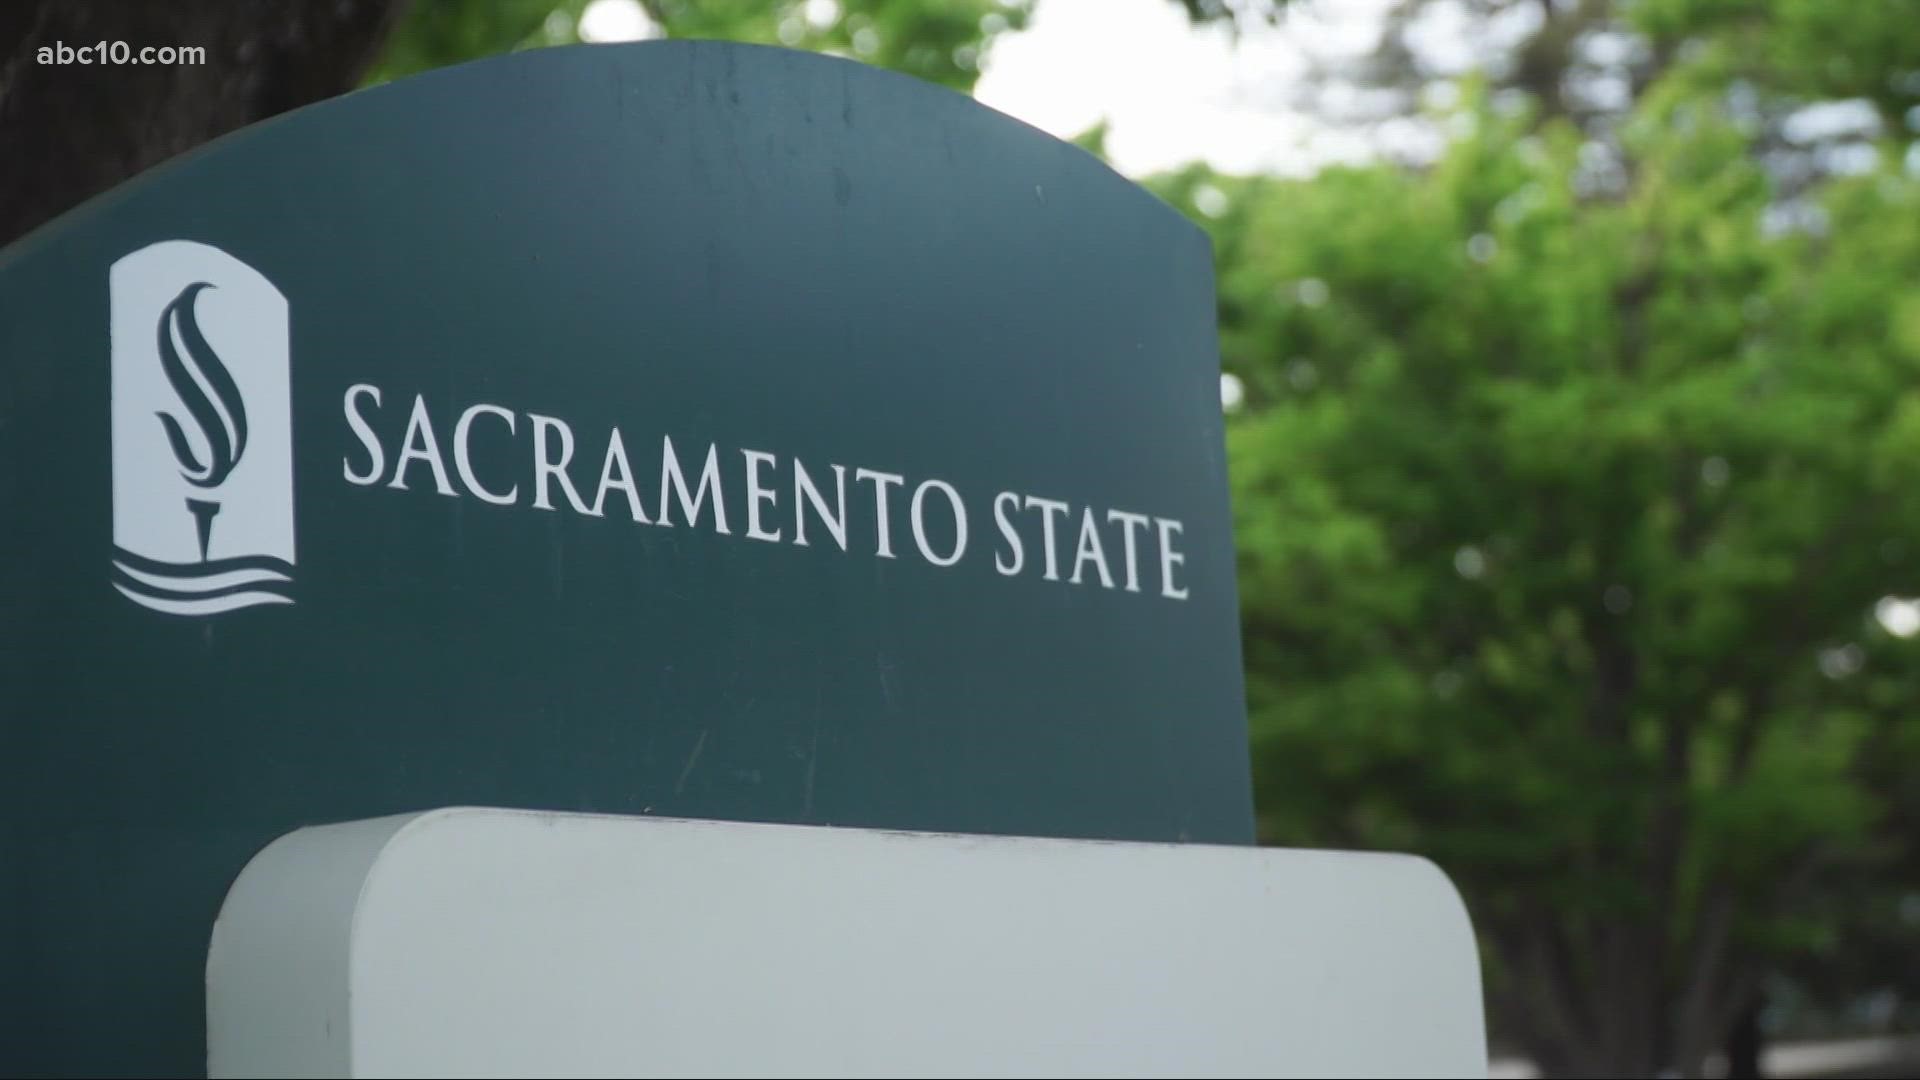 The California state auditor found that California State University colleges mishandled multiple allegations of sexual harassment against employees